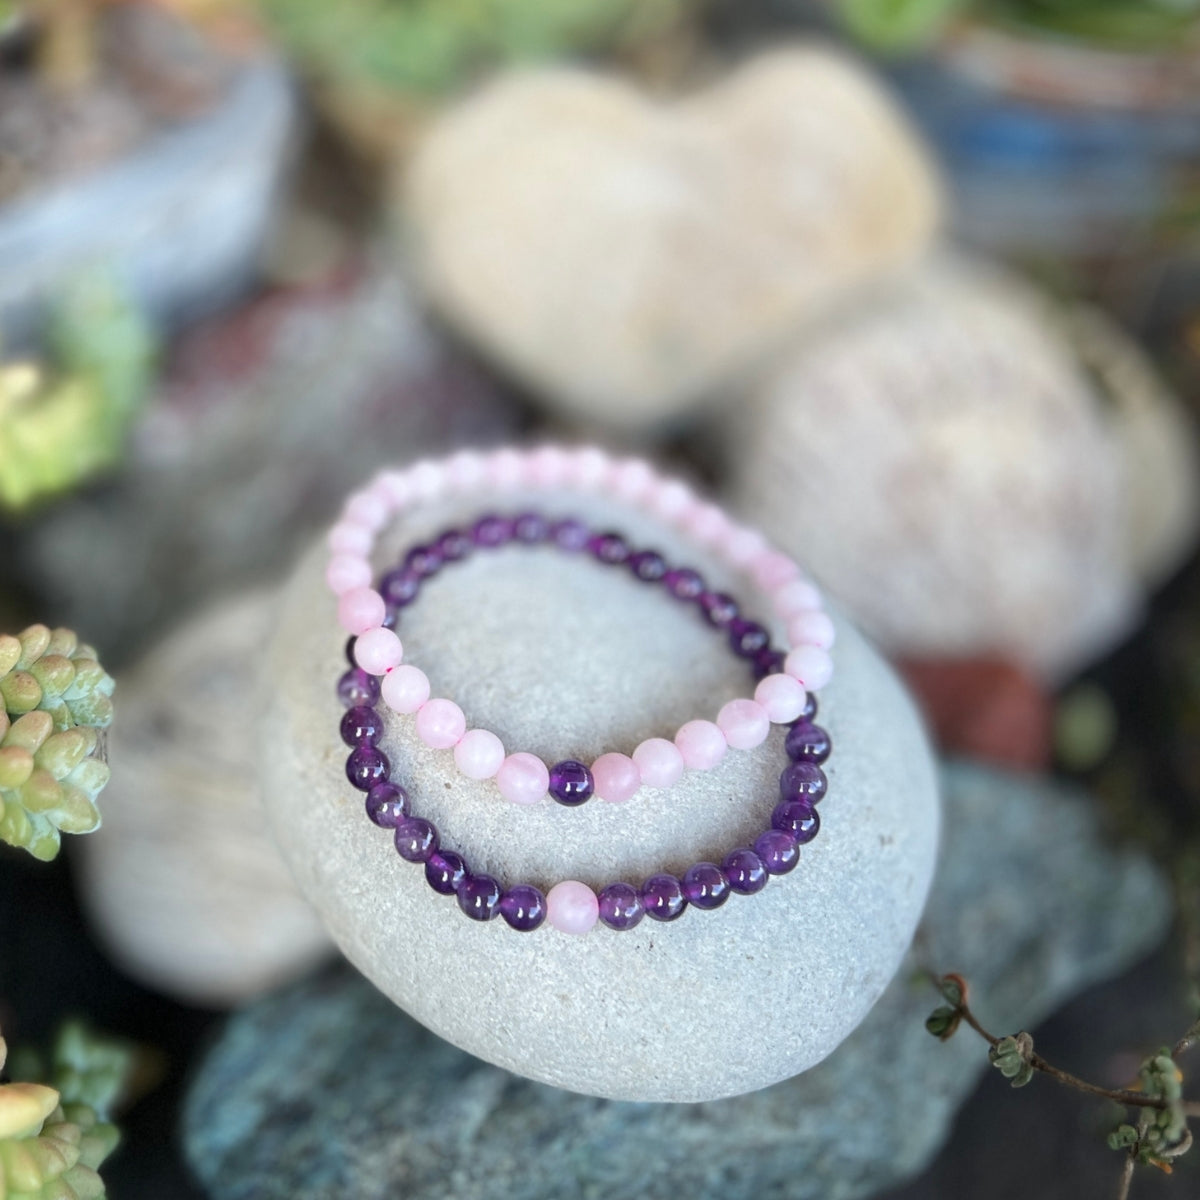 This healing gemstone bracelet pair will have you two lovestruck in a grounded Earthy way.  Spoil yourself and your love with these TWOgether Bracelets! Amethyst and Rose Quartz Bracelet Pair 🖤 🤍 for those couples who prefer less bling and more mindfulness in their lives.    Say "I love you" with this healing gemstone bracelet pair. It connects you two in a special bond.📿❤️